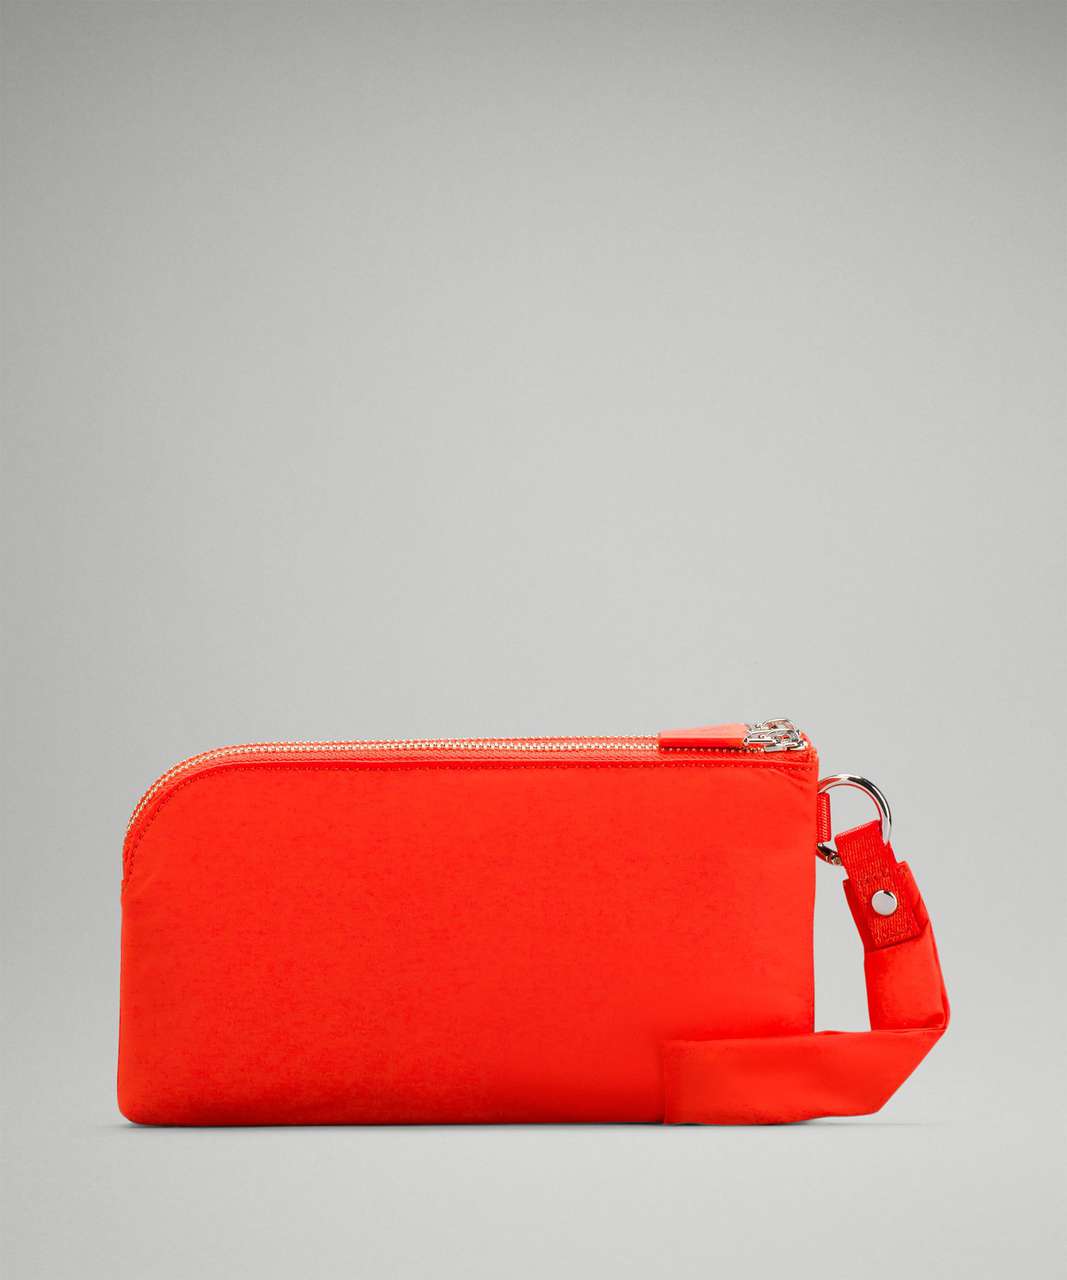 Lululemon Now and Always Pouch *Puffy - Autumn Red